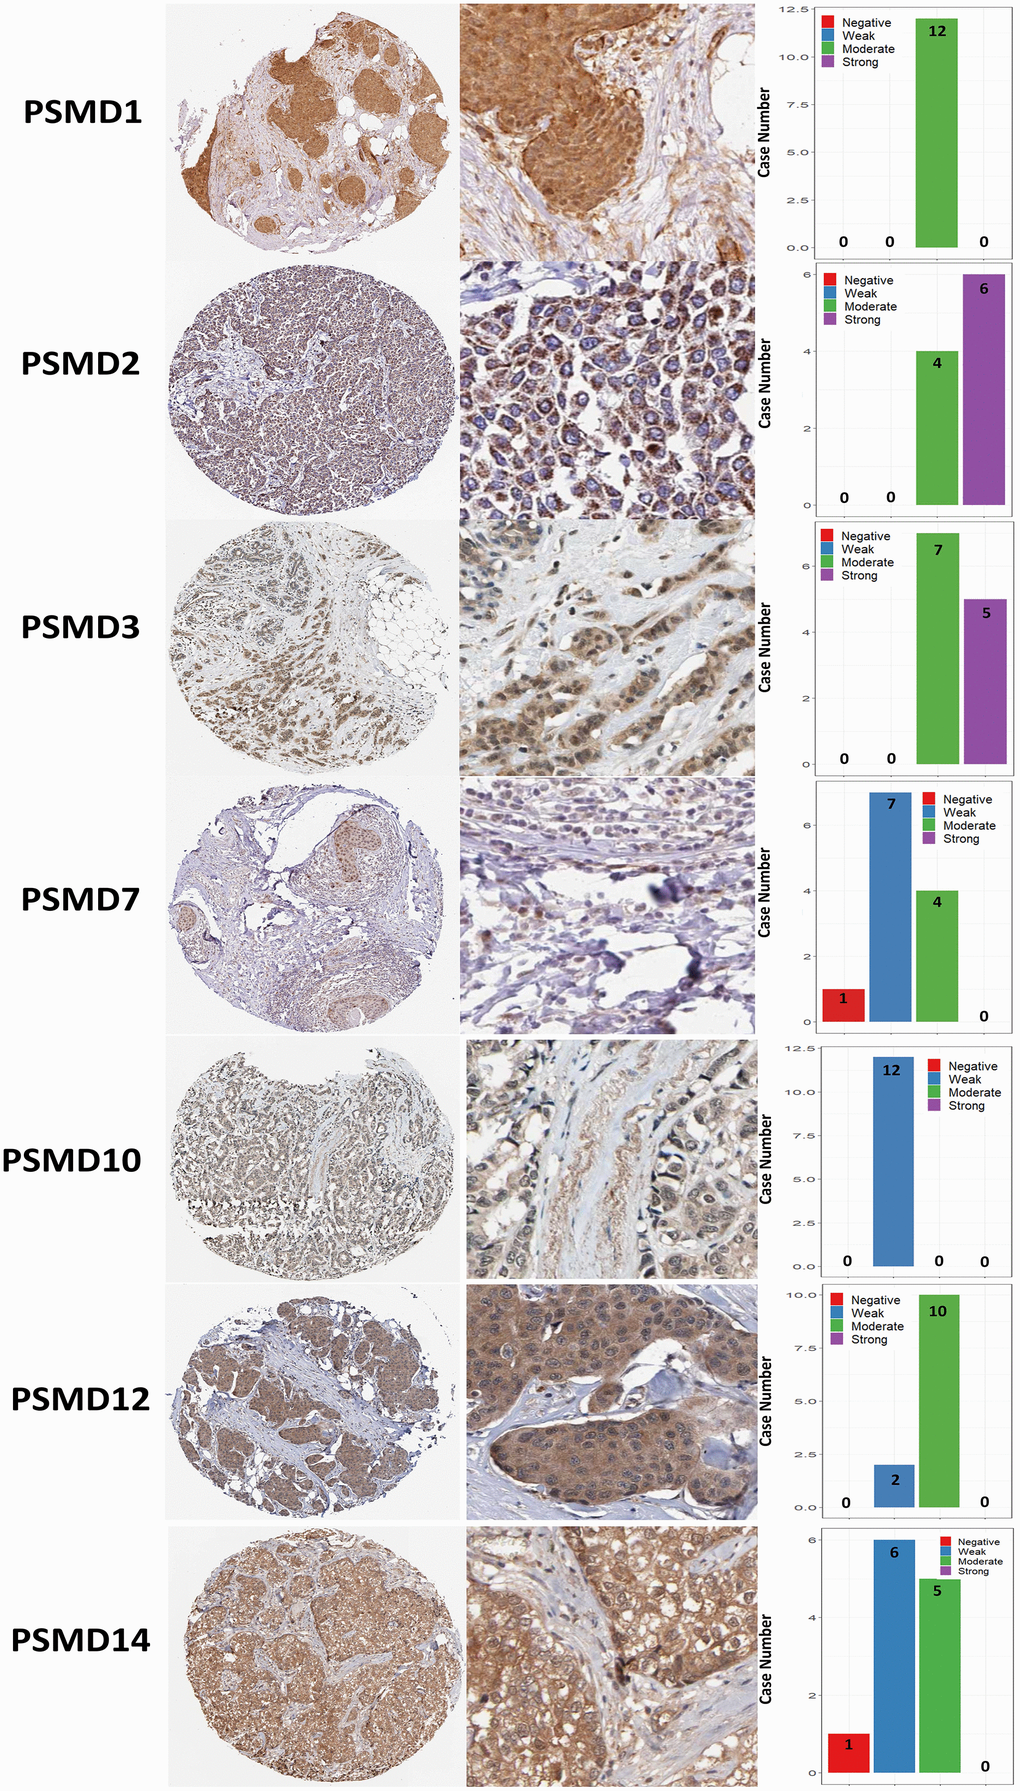 Immunohistochemical staining of 26S proteasome delta subunit, non-ATPase (PSMD) family members in normal tissues and breast cancer (BRCA) tissues represented in IHC staining images and bar chart. The images illustrate intensities of antibodies in both BRCA and adjacent normal tissues while the bar charts of IHC staining show intensities of PSMD family members in BRCA.